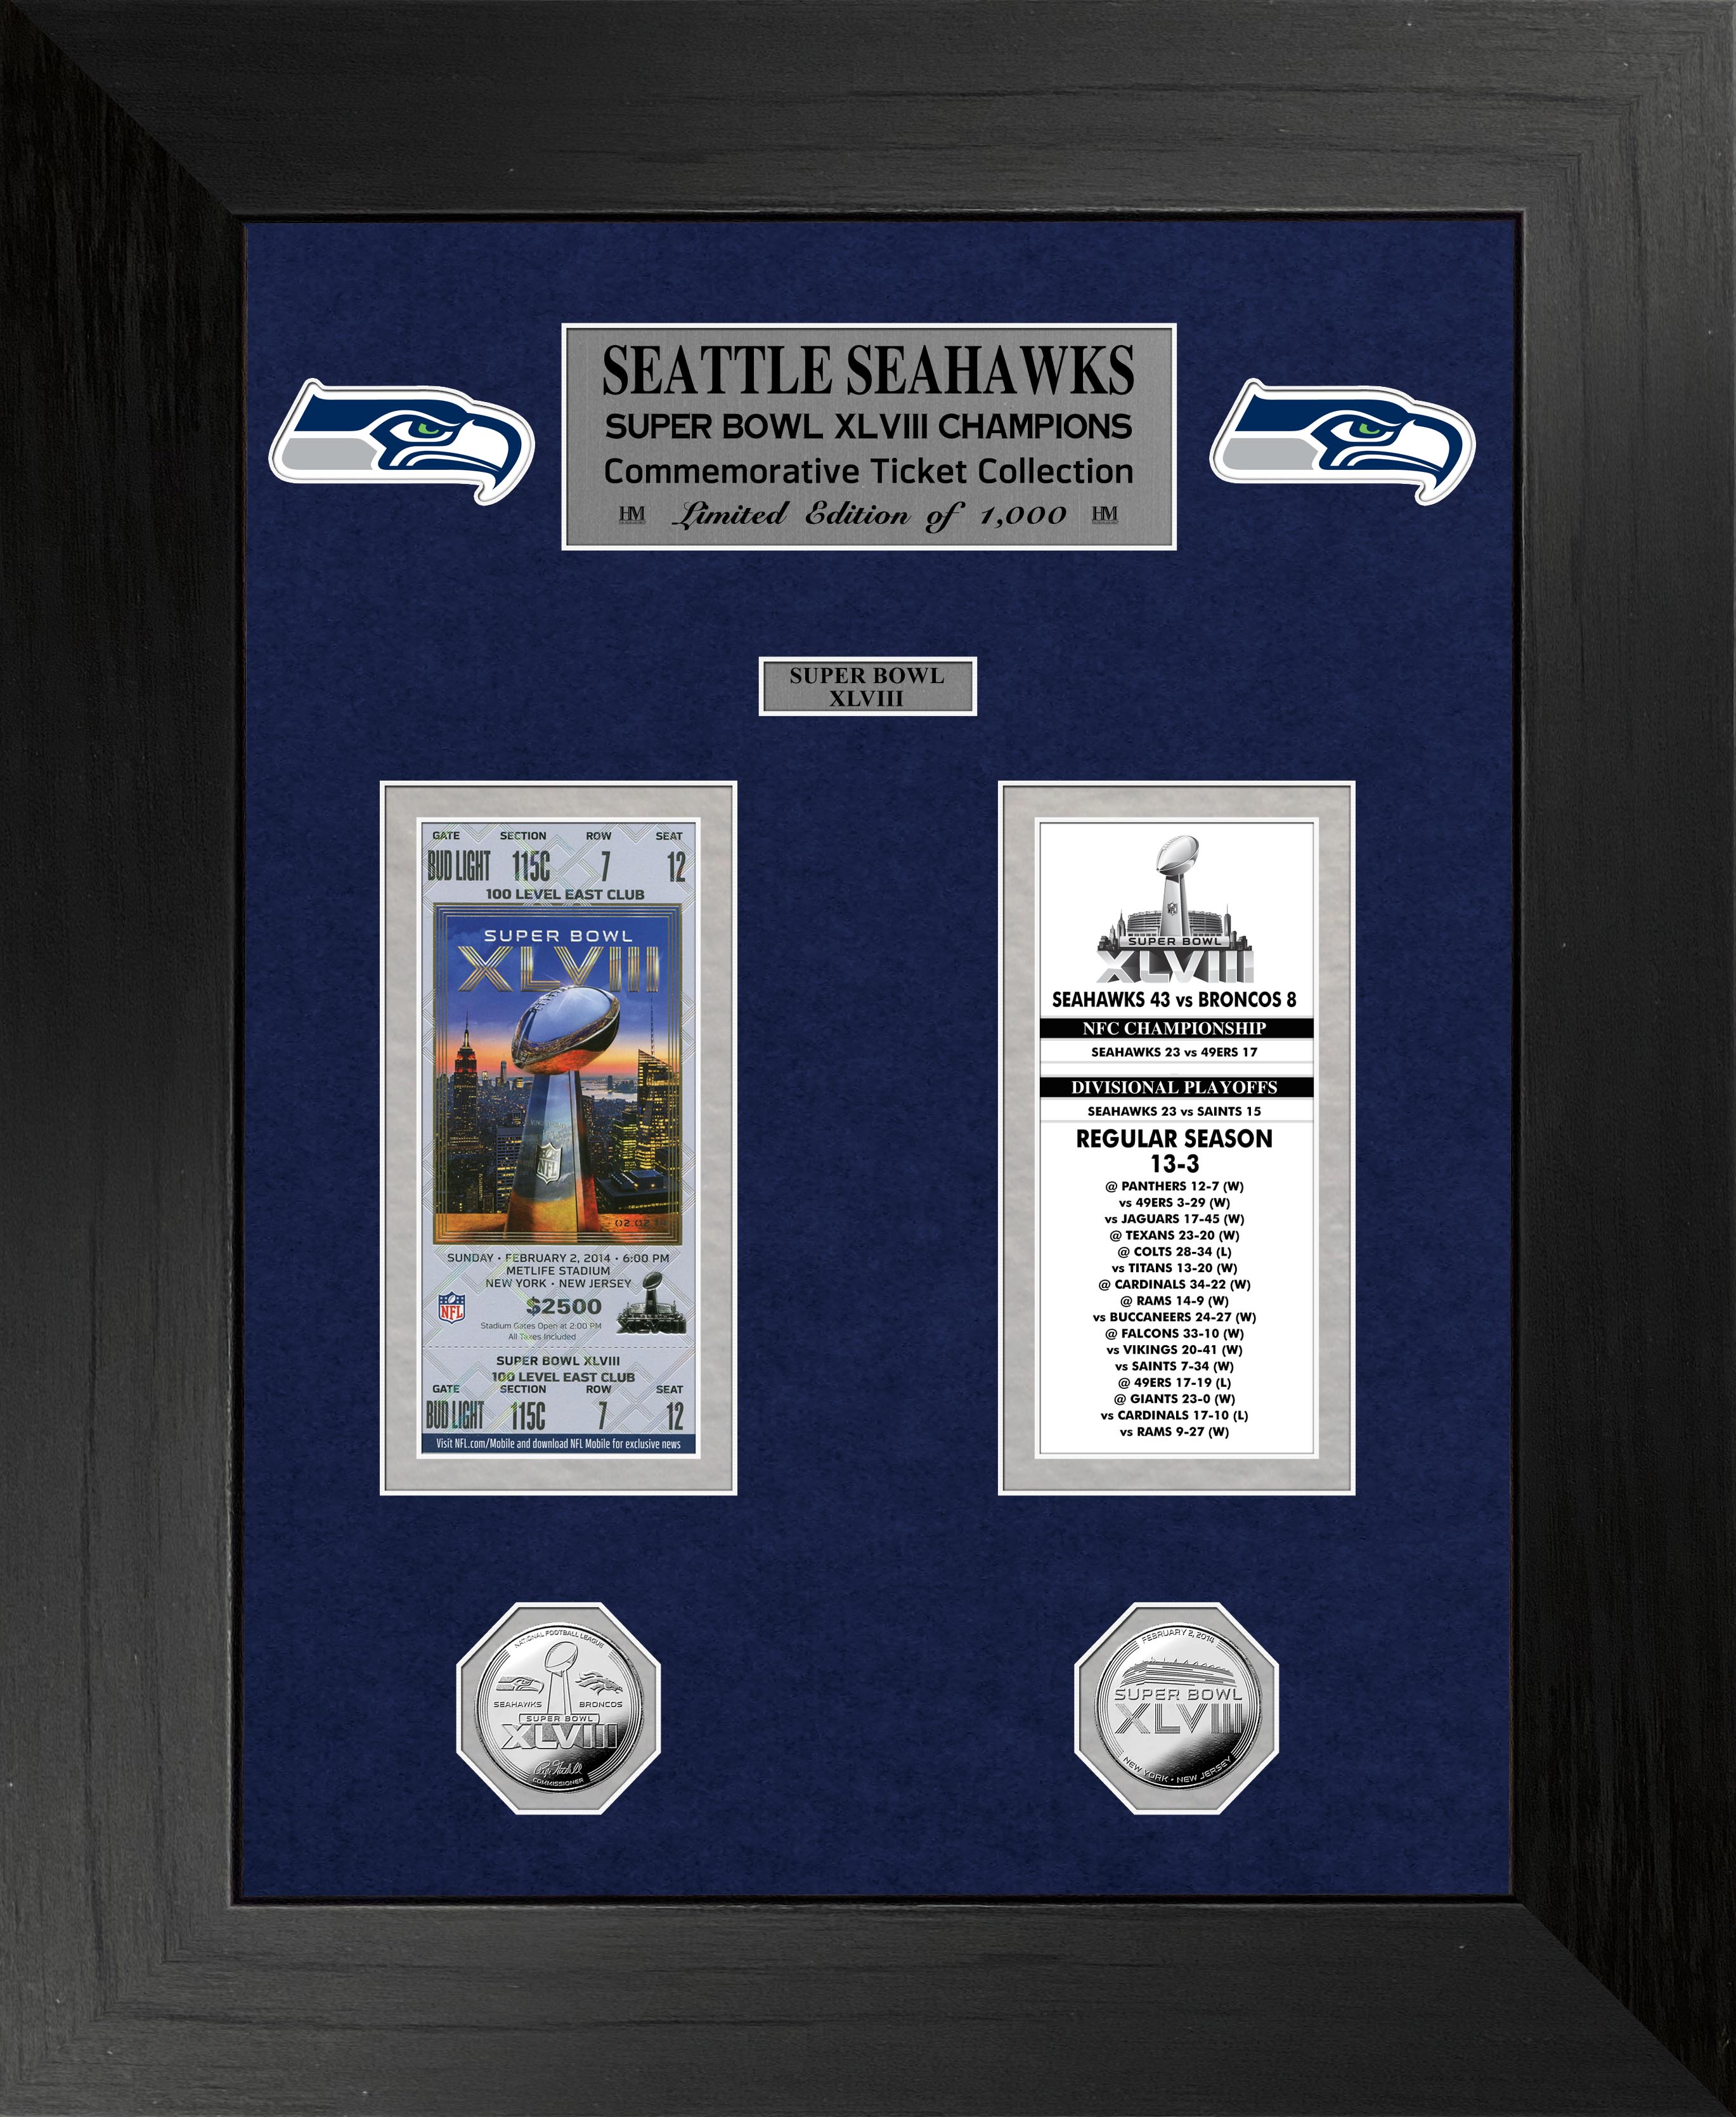 Seattle Seahawks Super Bowl Ticket and Game Coin Collectable